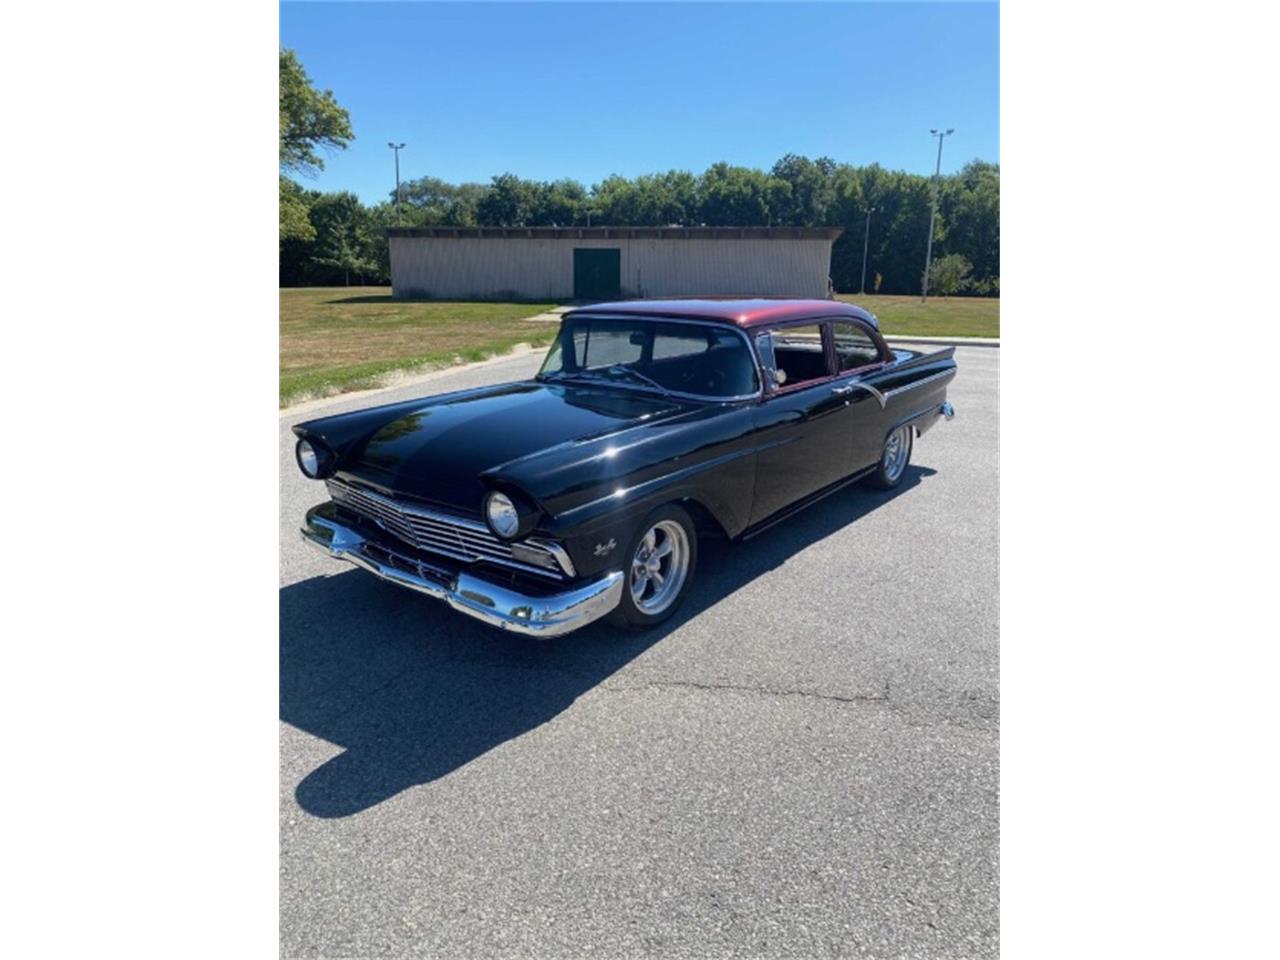 For Sale: 1957 Ford Custom in Hobart, Indiana for sale in Hobart, IN